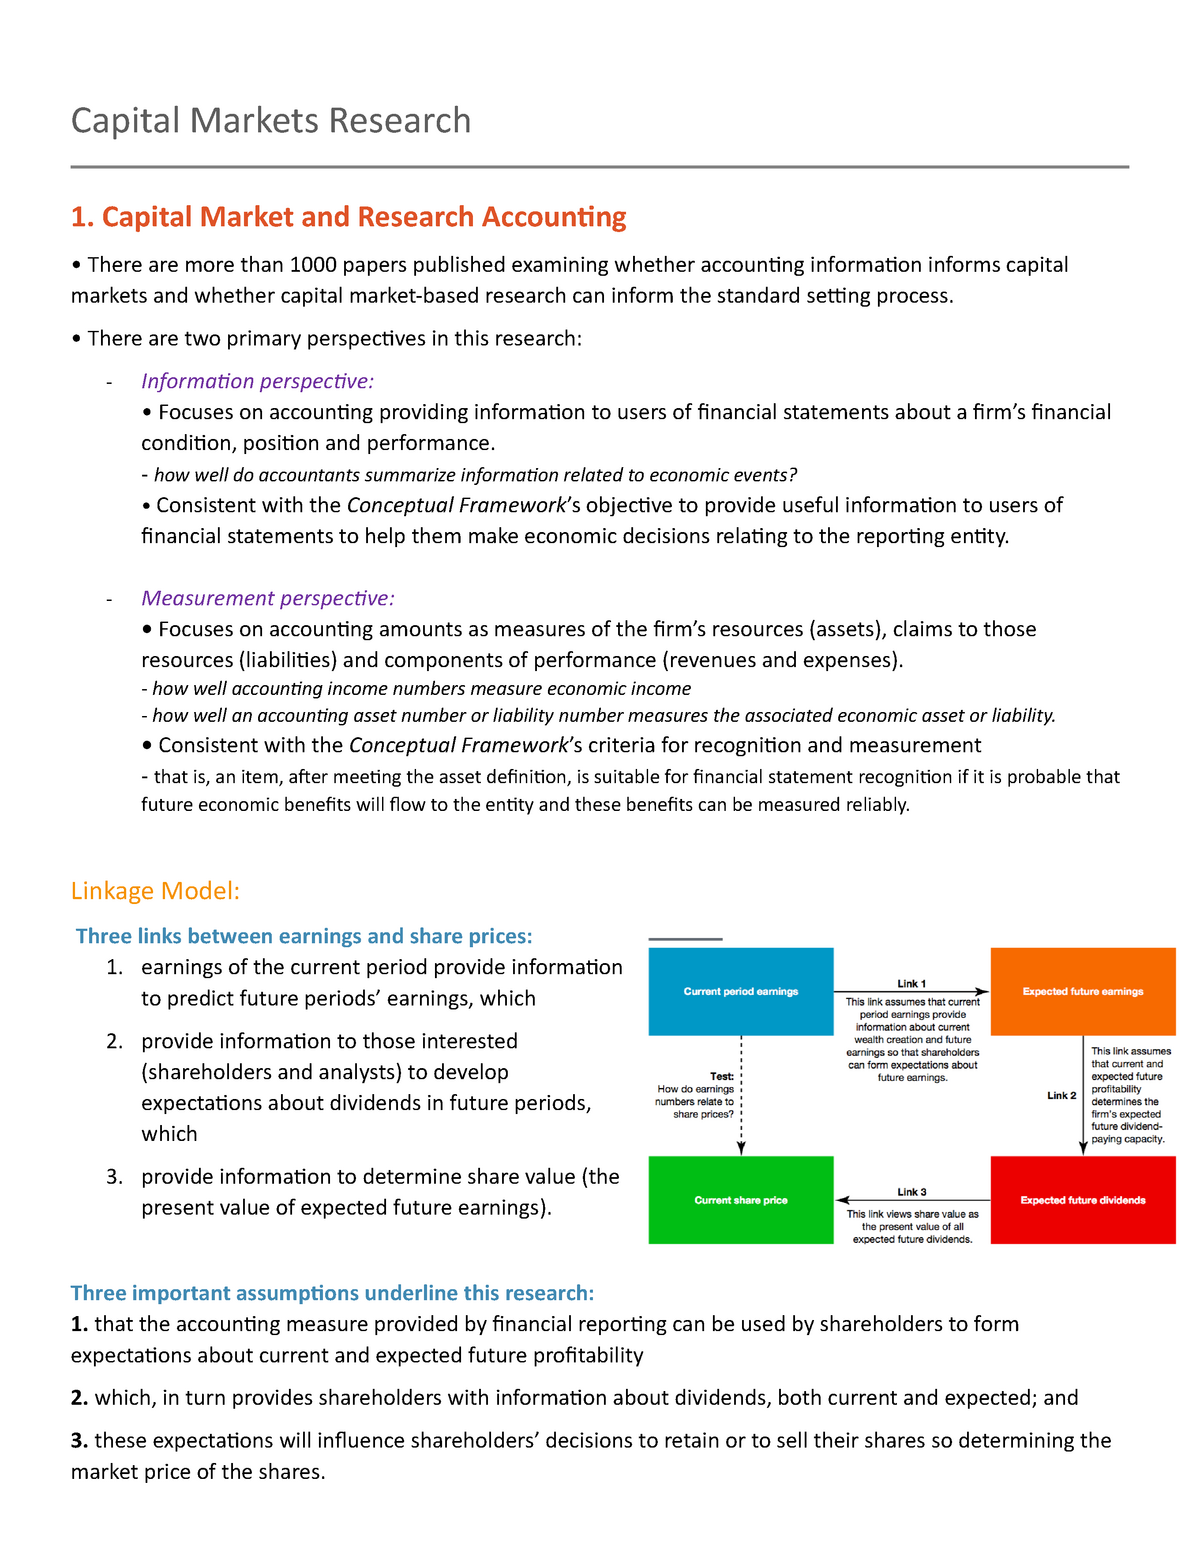 literature review of capital market